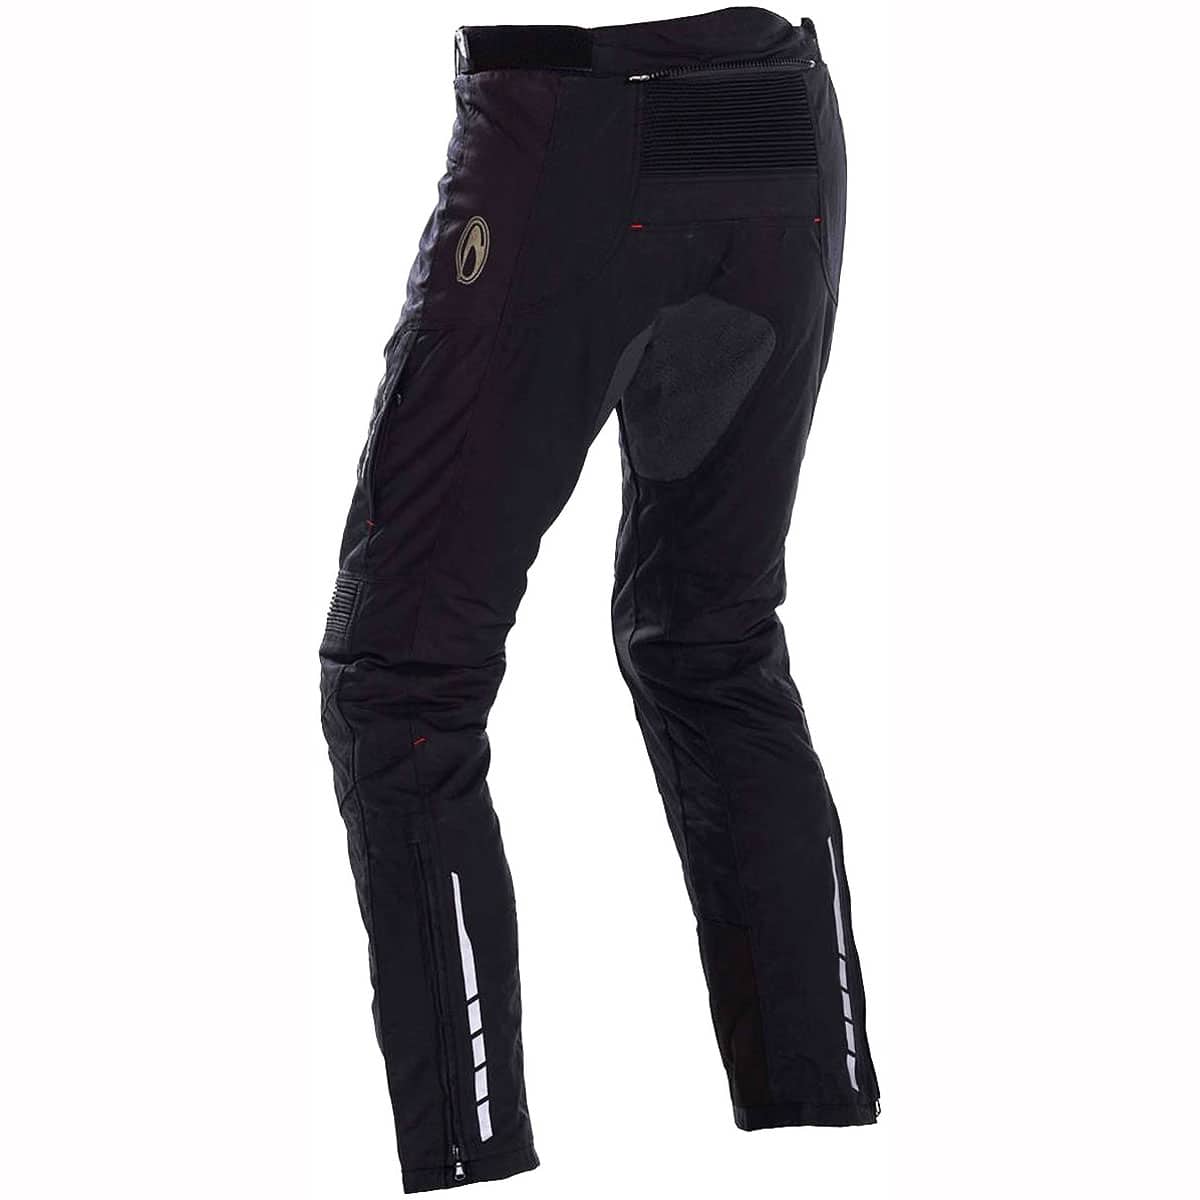 Waterproof ladies textile motorcycle trousers from Richa with D3O armour - seat